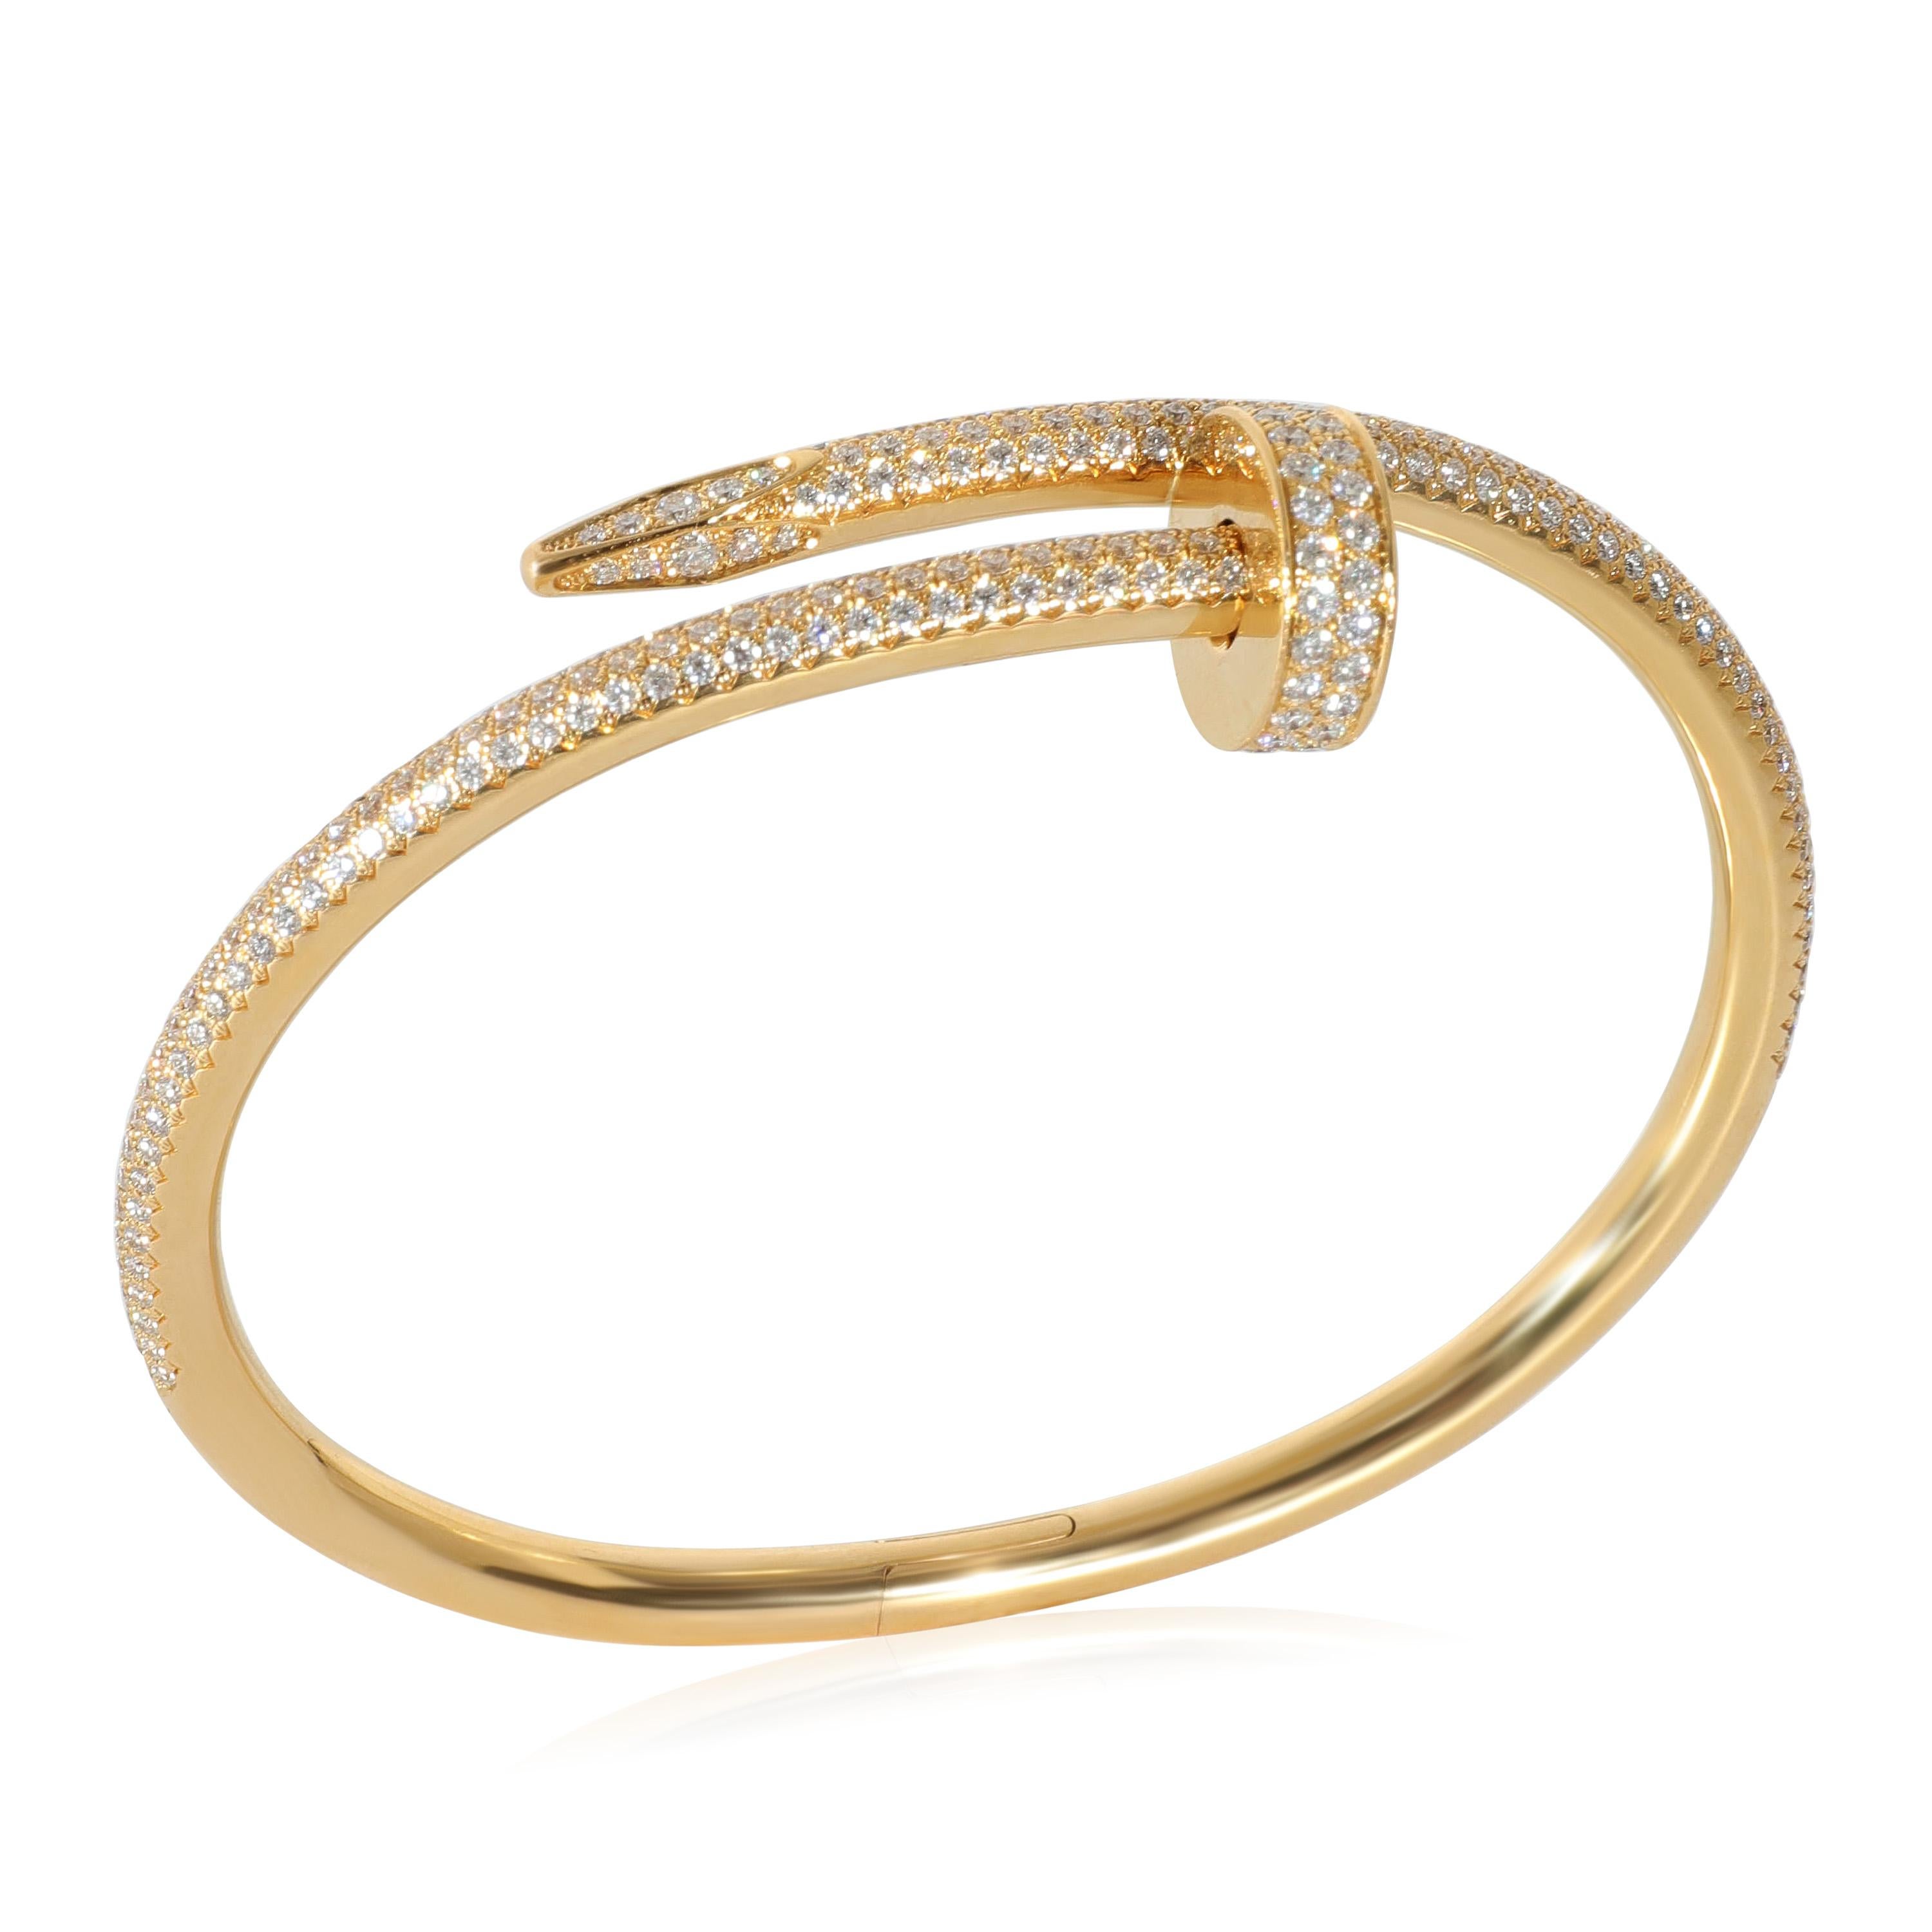 Cartier Juste Un Clou Diamond Pave Bracelet in 18k Yellow Gold 2.26 Ctw In Excellent Condition For Sale In New York, NY